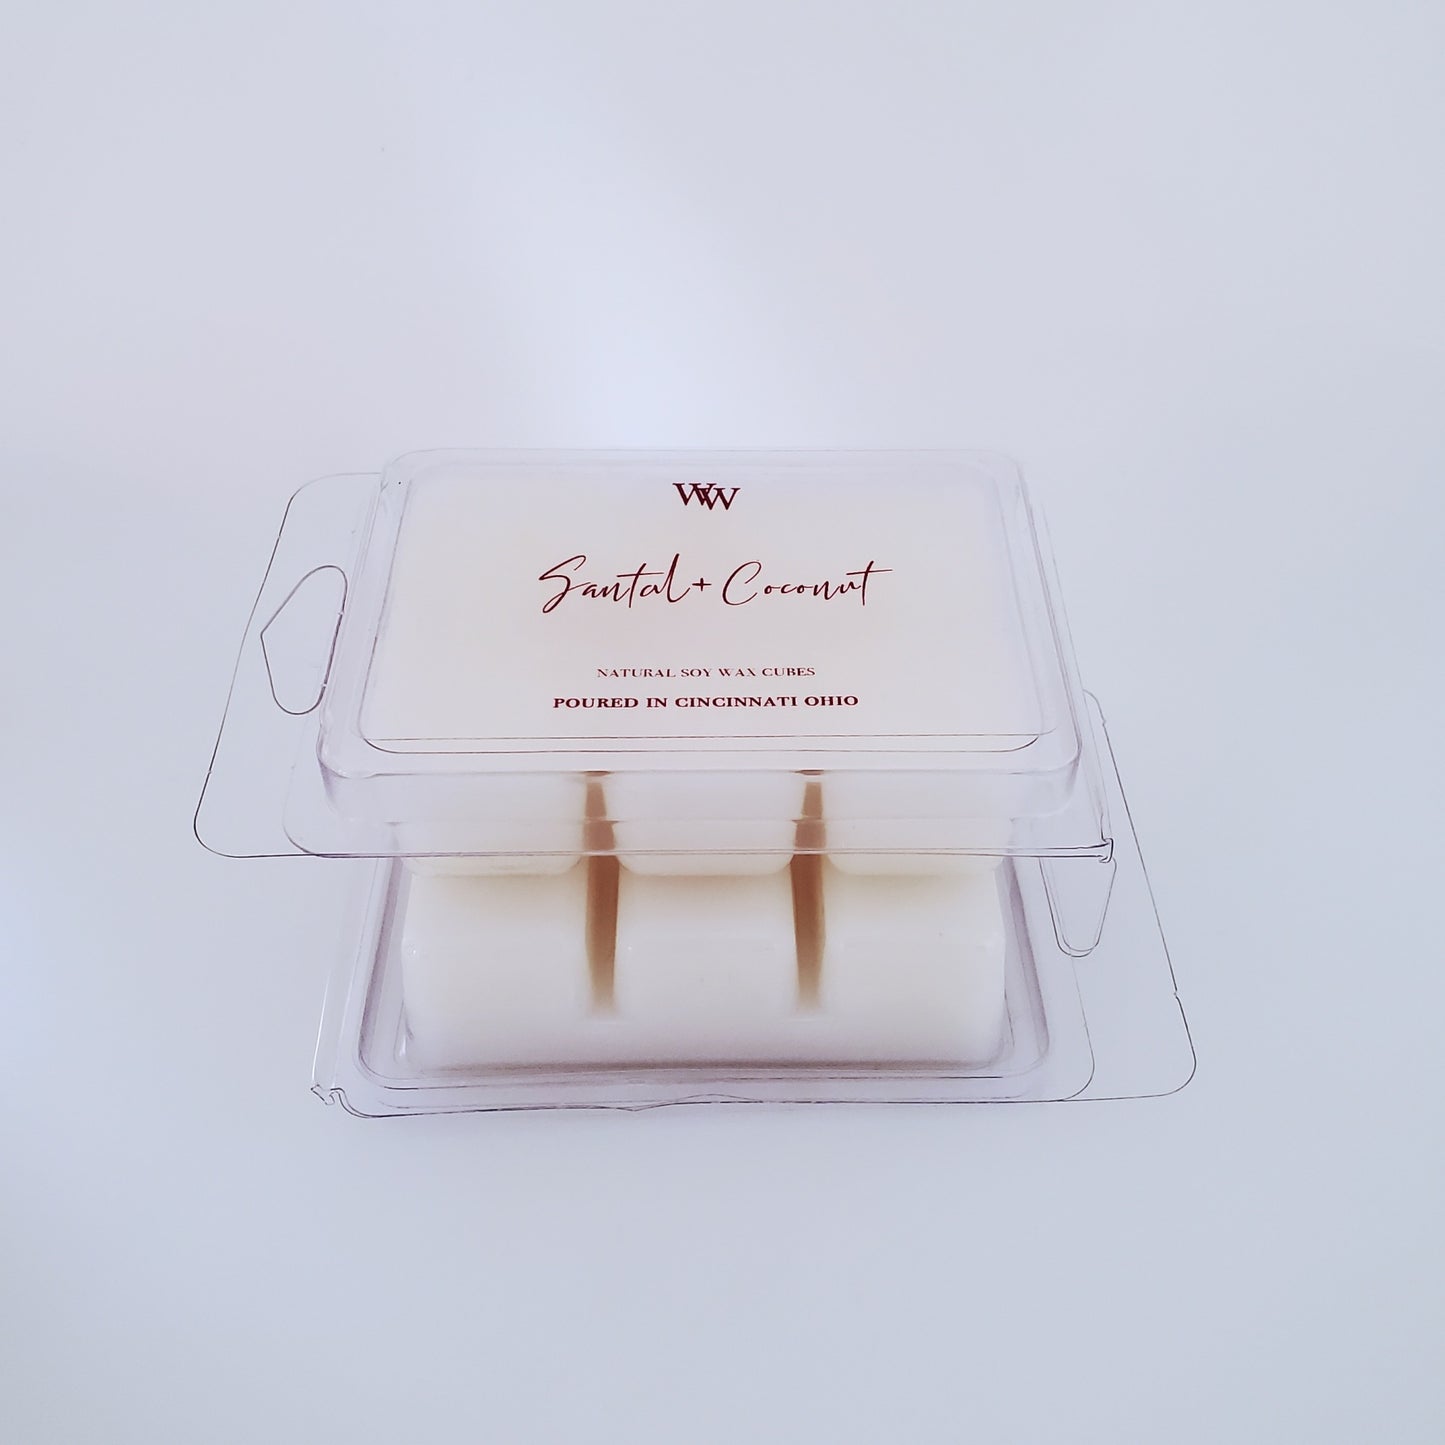 Santal + Coconut Highly Scented Soy Wax Melts